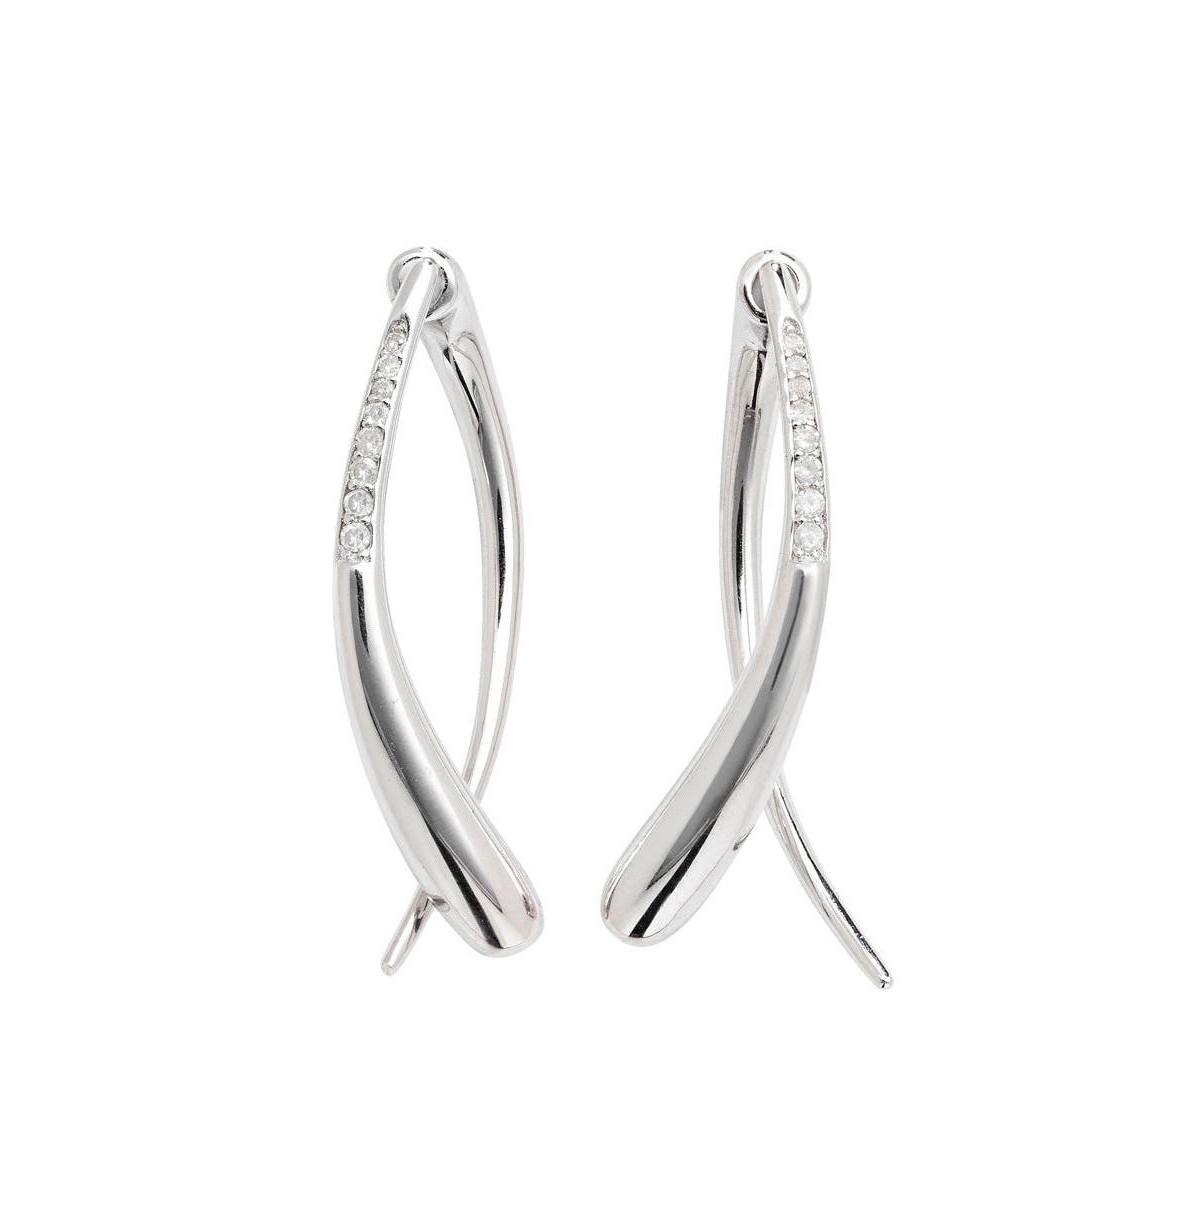 Sycamore front and back earrings - Silver